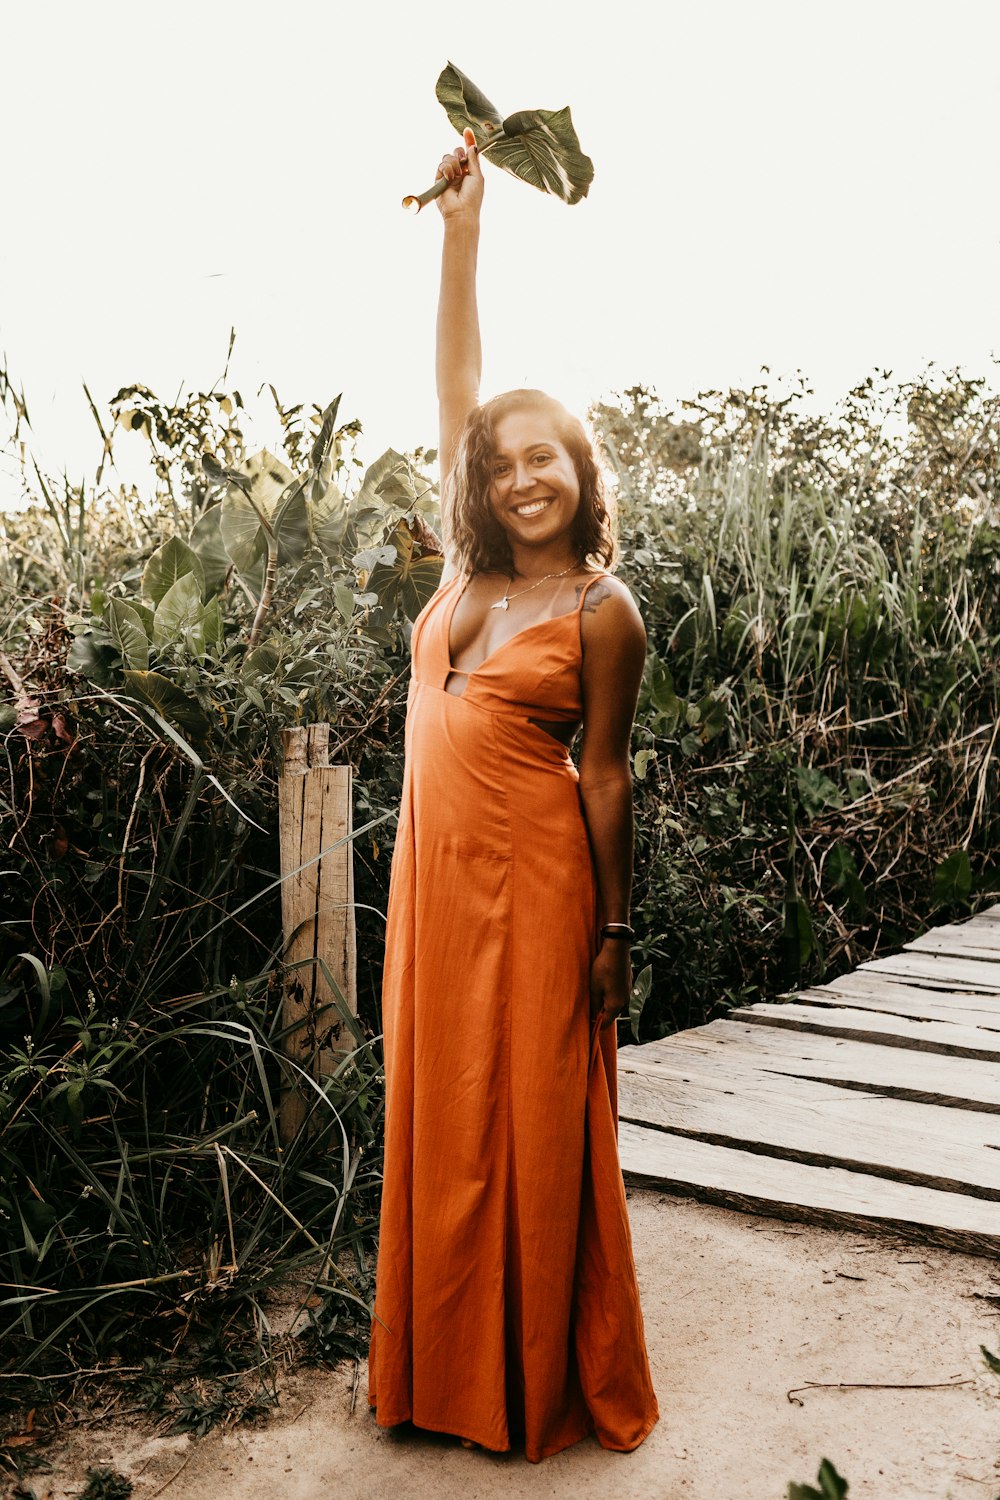 smiling woman wearing orange standing dress holding and raising green leaf while standing near plants